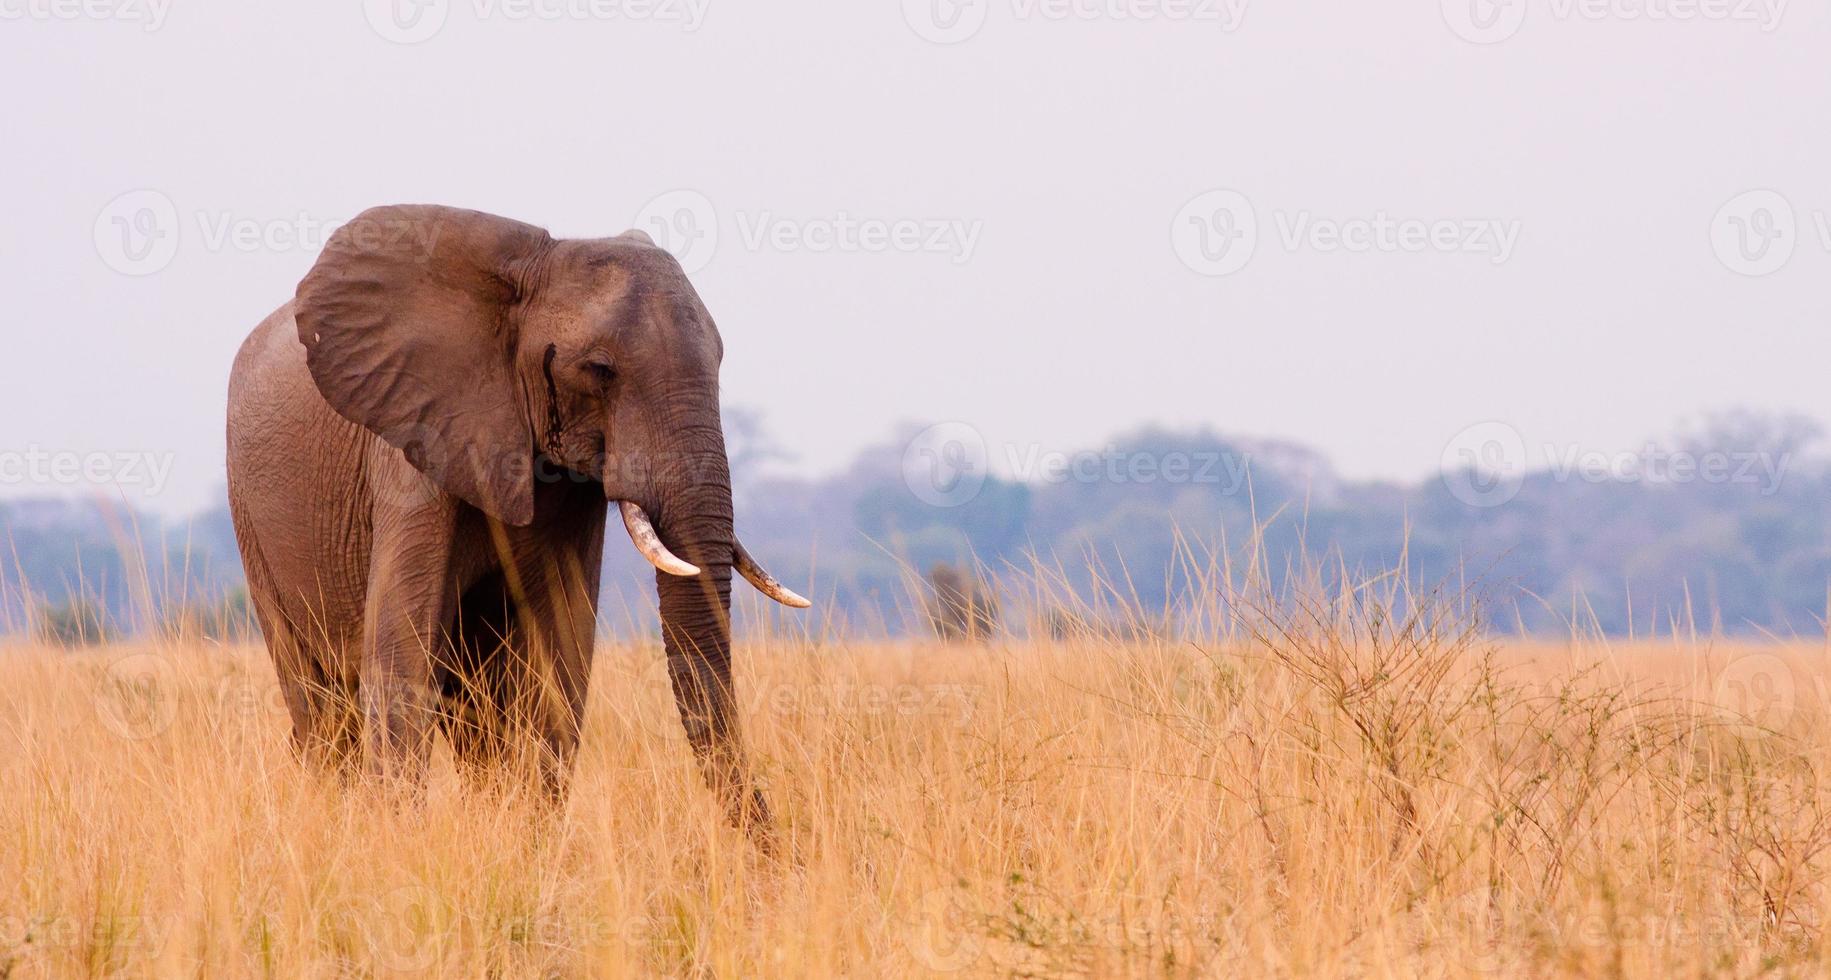 Elephant in the grass photo